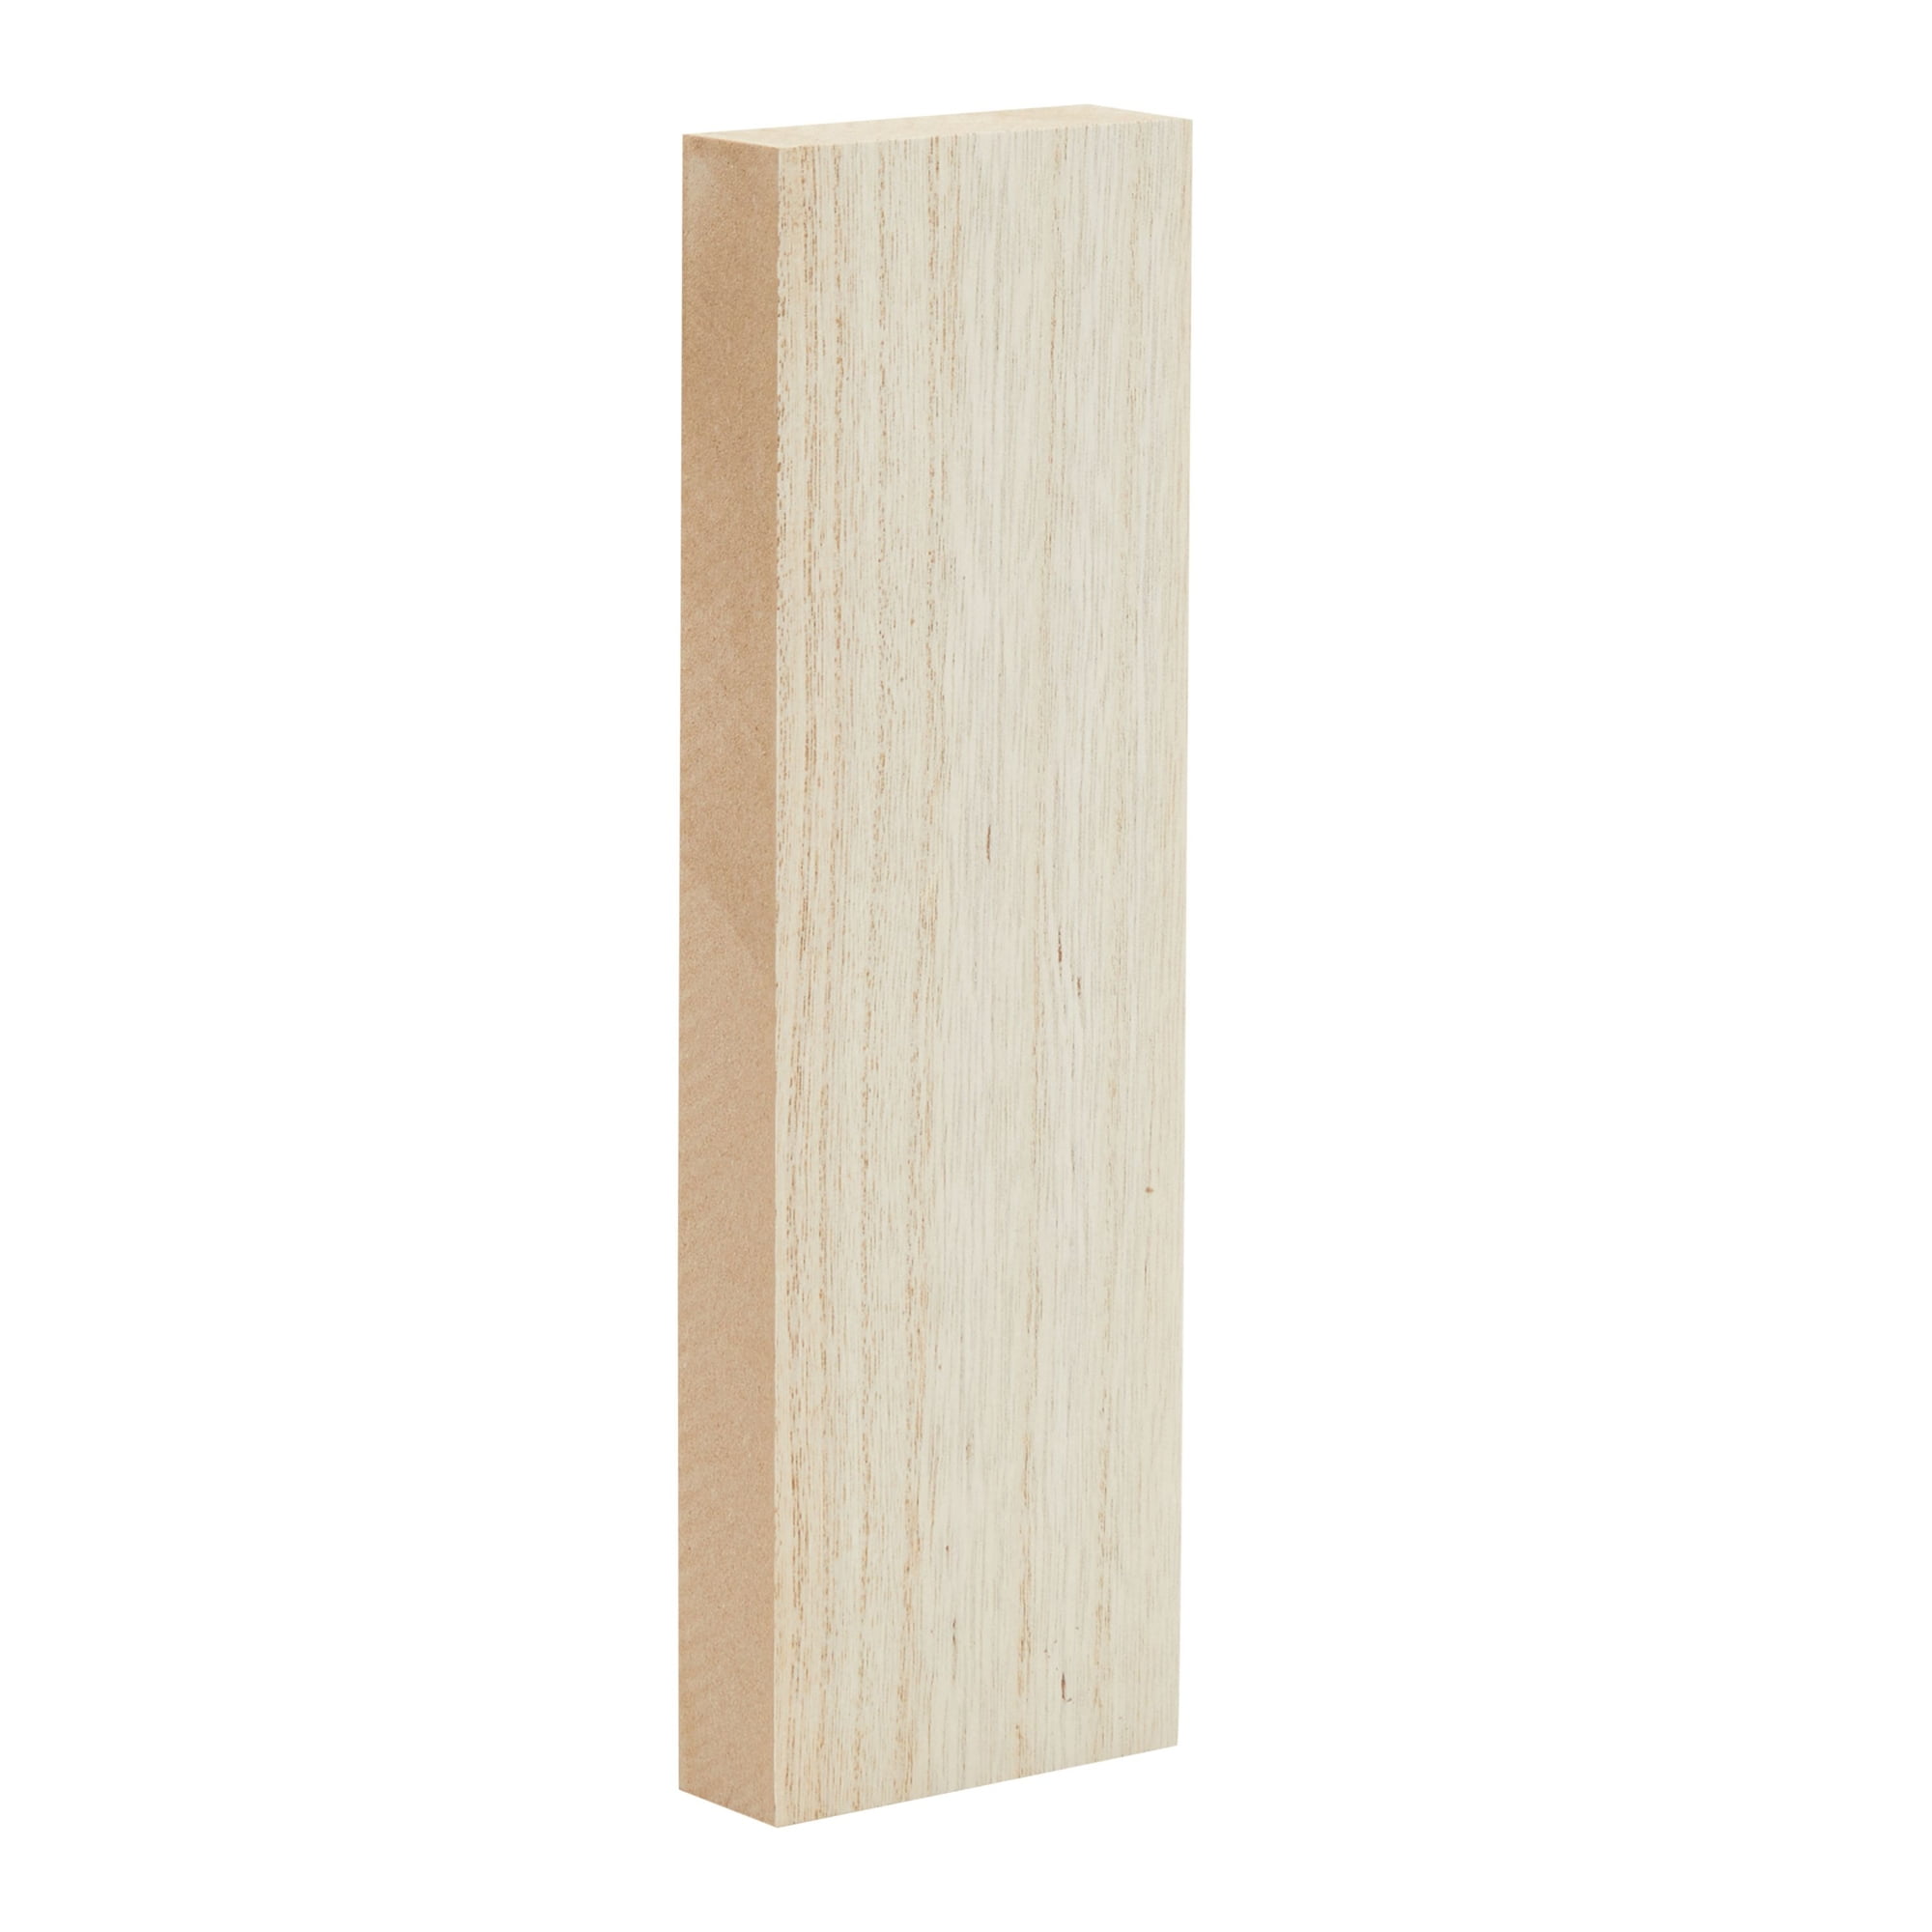 Whittlewud Pack of 10 Pieces wood board, can be used for wedding